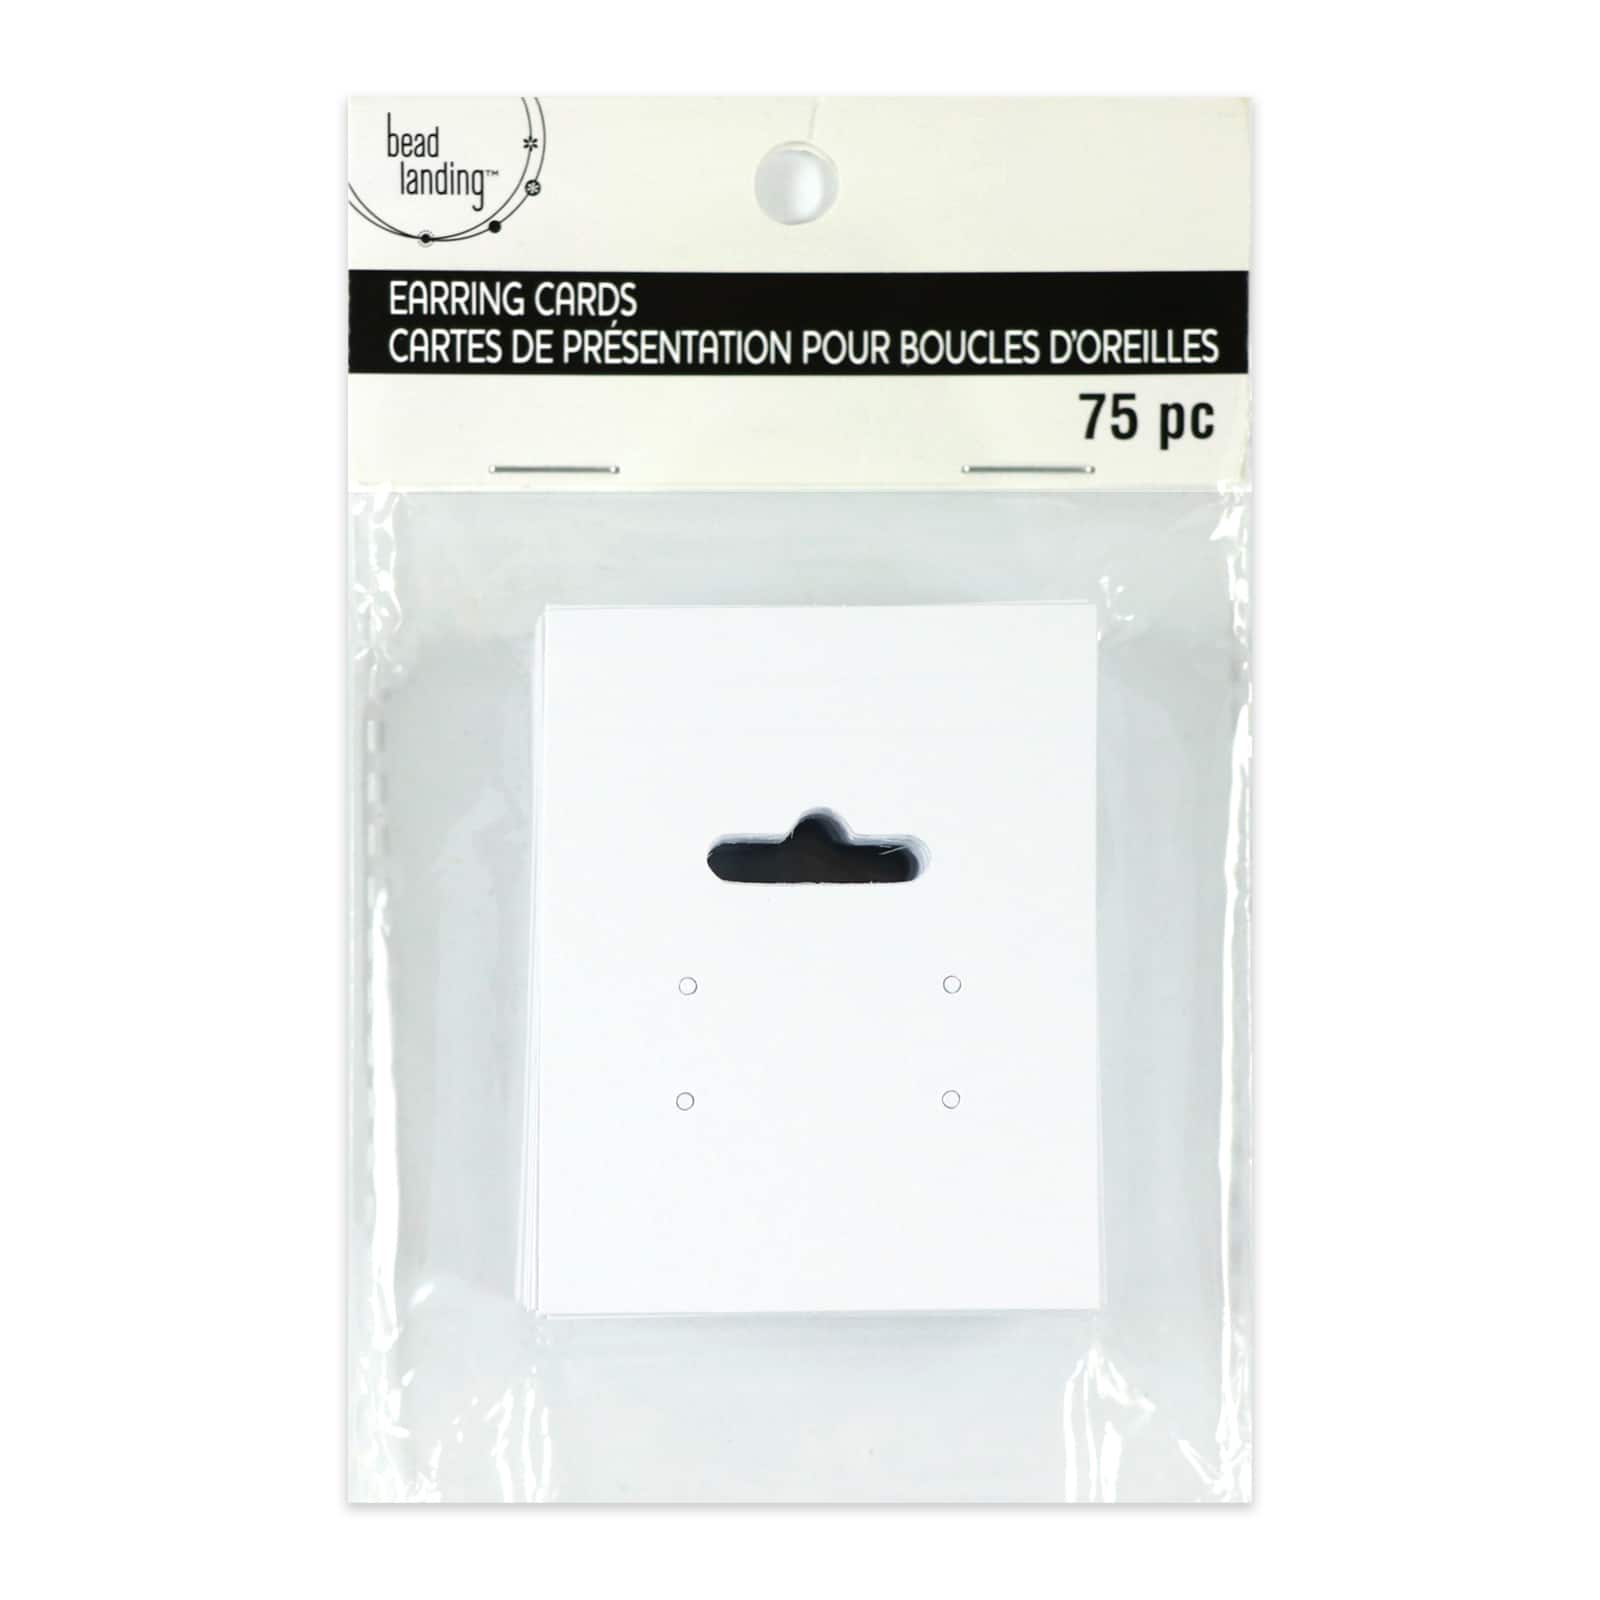 12 Packs: 75 ct. (900 total) White Paper Earring Cards by Bead Landing&#x2122;